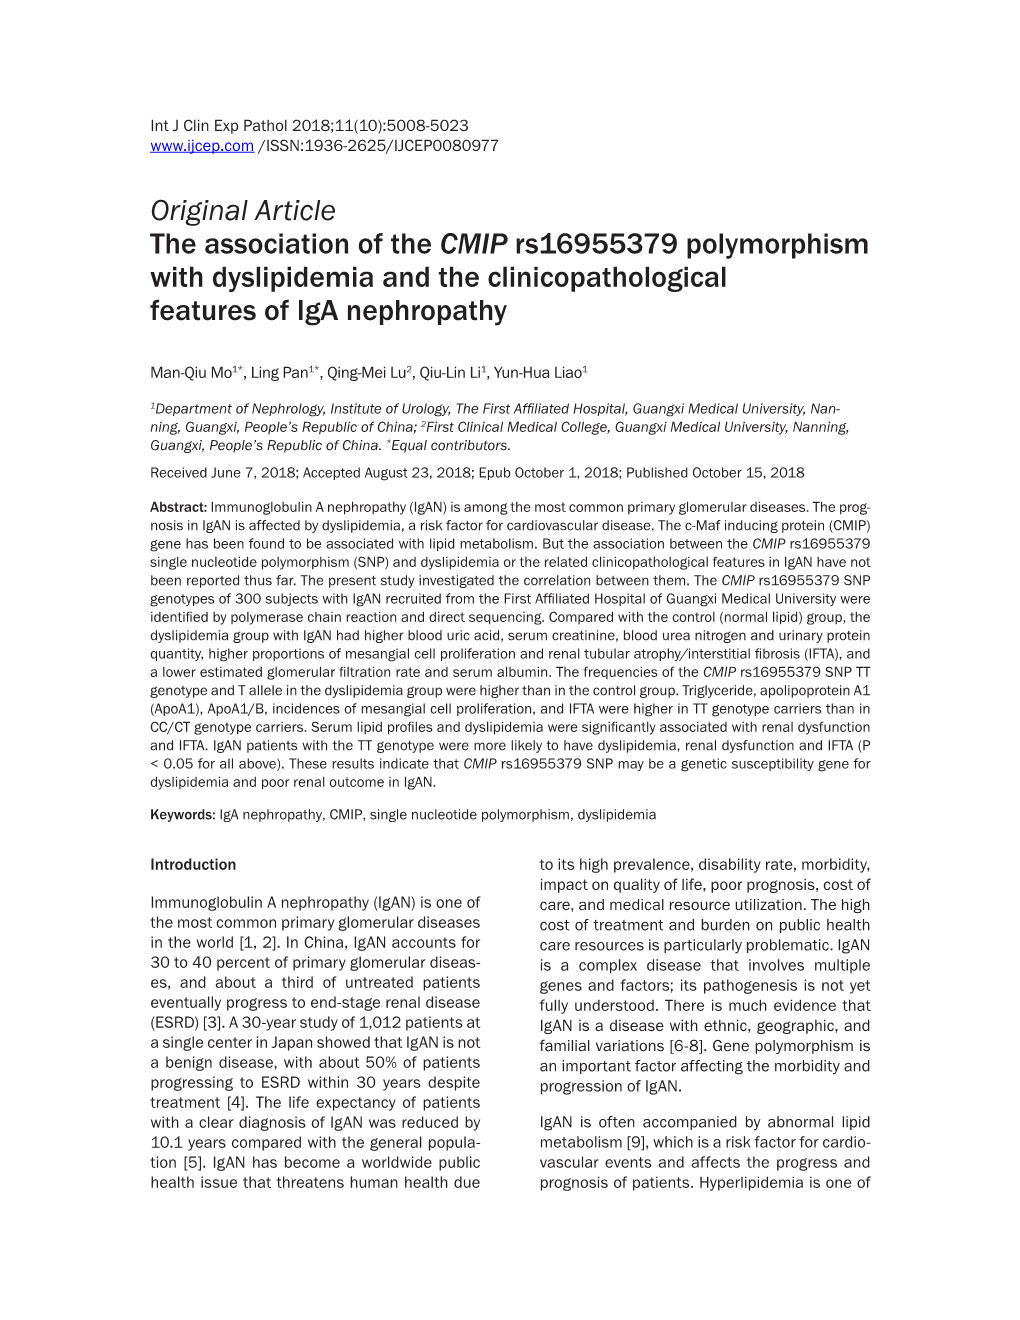 Original Article the Association of the CMIP Rs16955379 Polymorphism with Dyslipidemia and the Clinicopathological Features of Iga Nephropathy